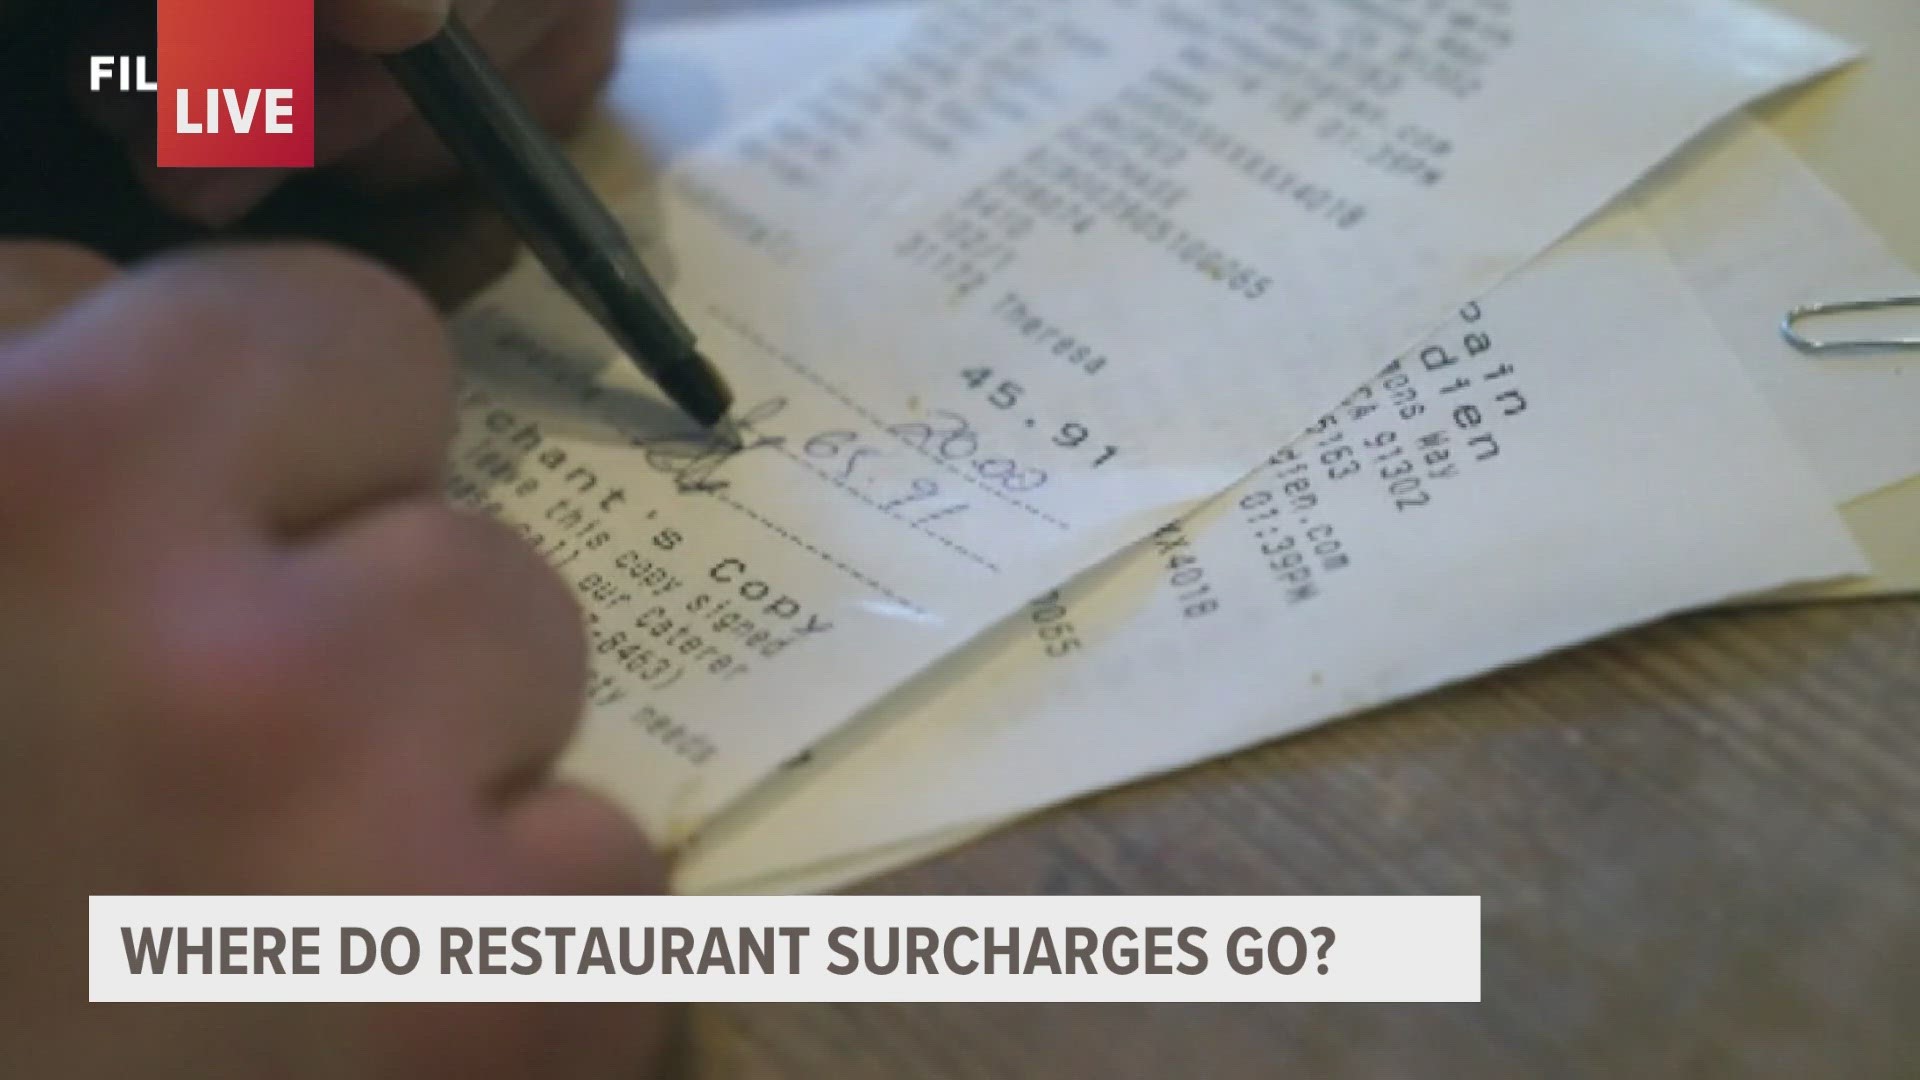 While these surcharges are becoming more common, many may be wondering where your money is exactly going when you go out to eat.